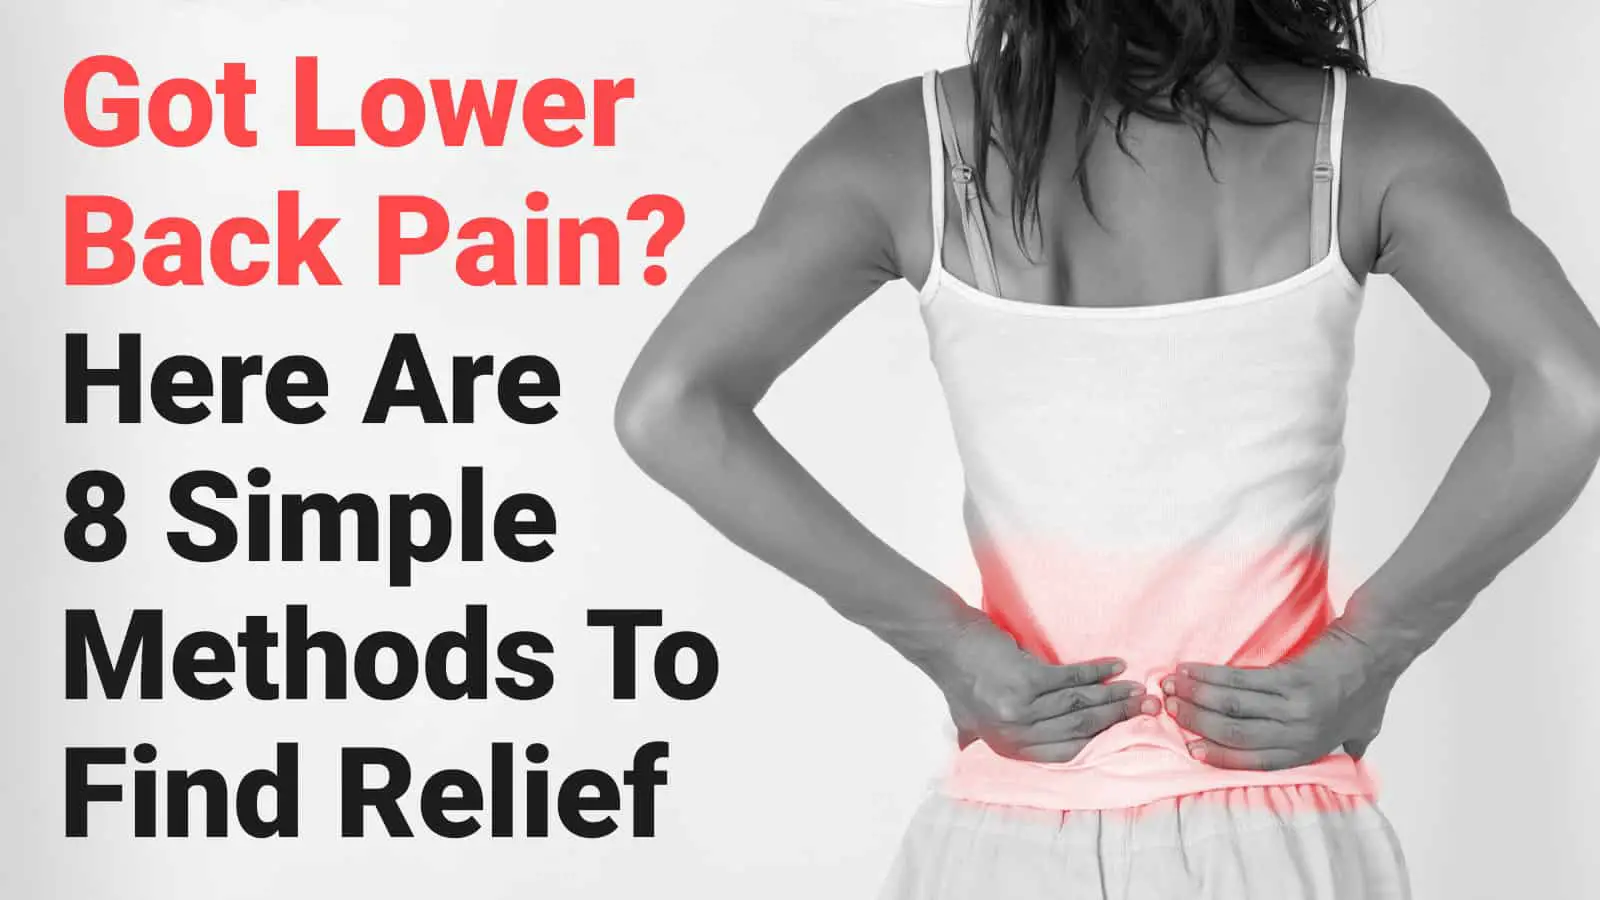 Got Lower Back Pain? Here Are 8 Simple Methods To Find Relief